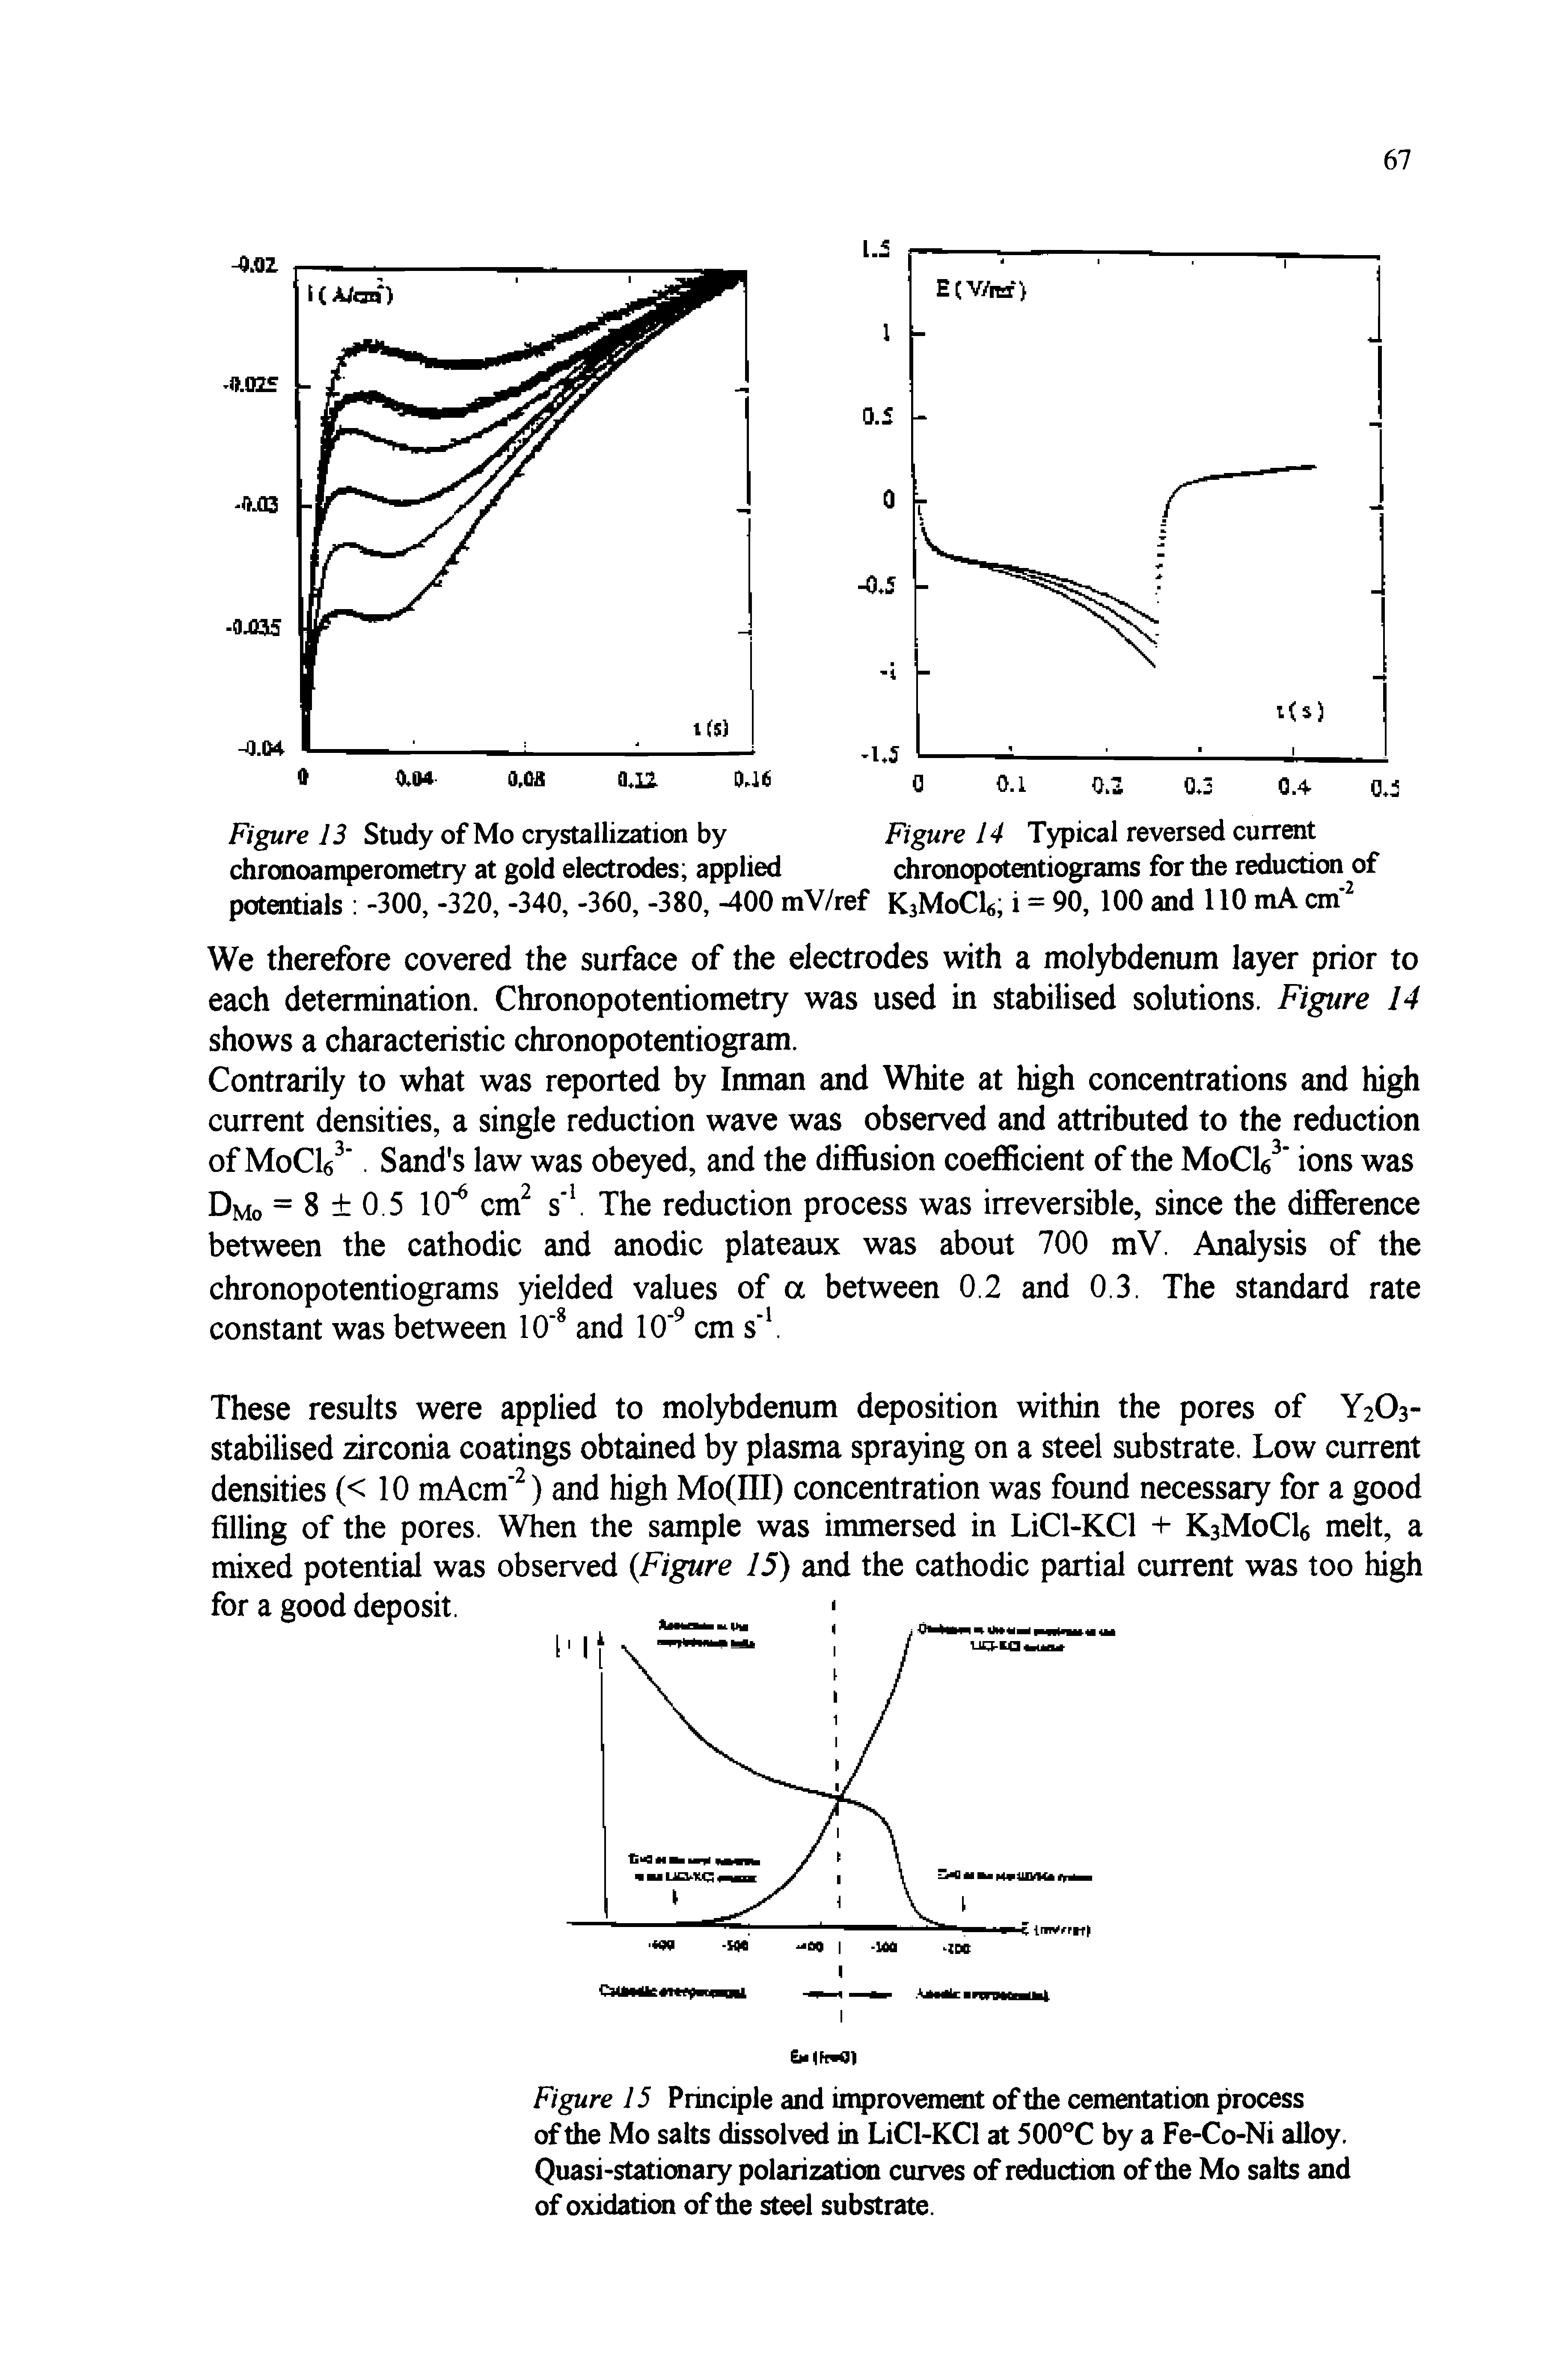 Figure 15 Principle and improvement of the cementation process of the Mo salts dissolved in LiCl-KCl at 500 C by a Fe-Co-Ni alloy. Quasi-stationary polarization curves of reduction of the Mo salts and of oxidation of the steel substrate.